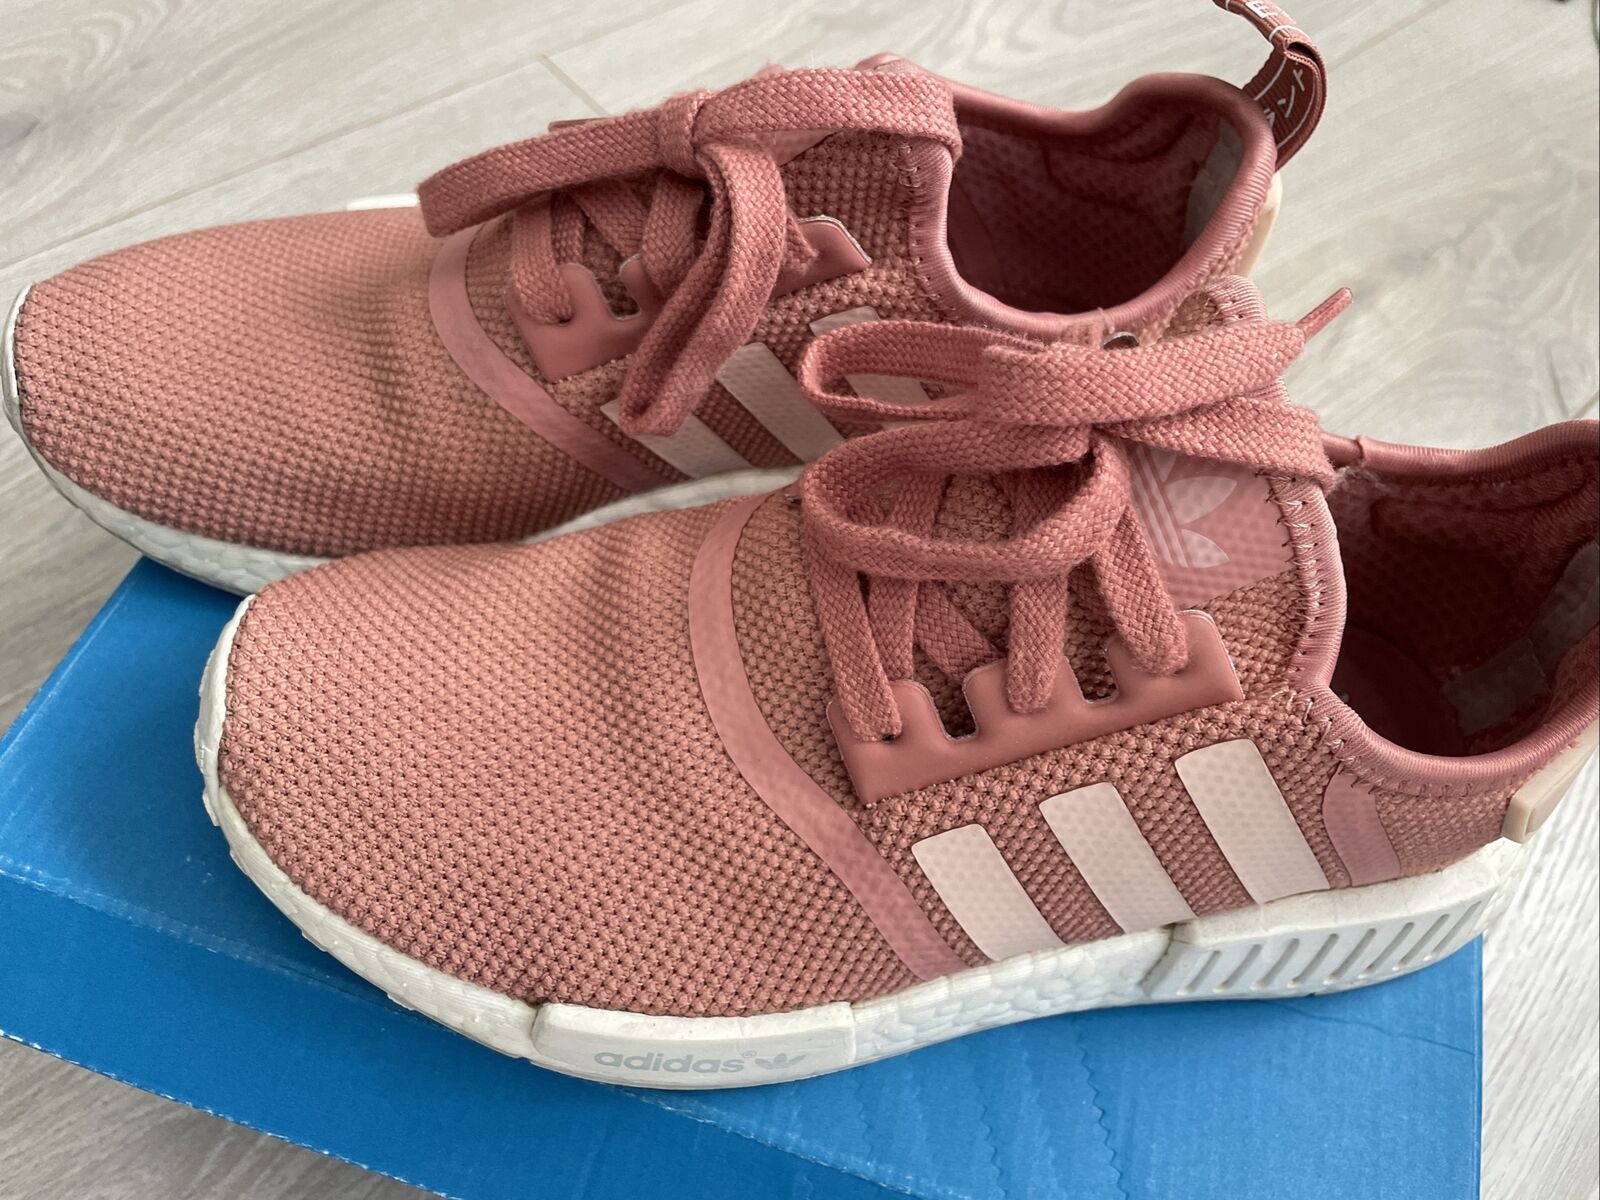 Adidas NMD R1 Women's Running Shoes Size 6.5 Raw S76006 889765069398 | eBay